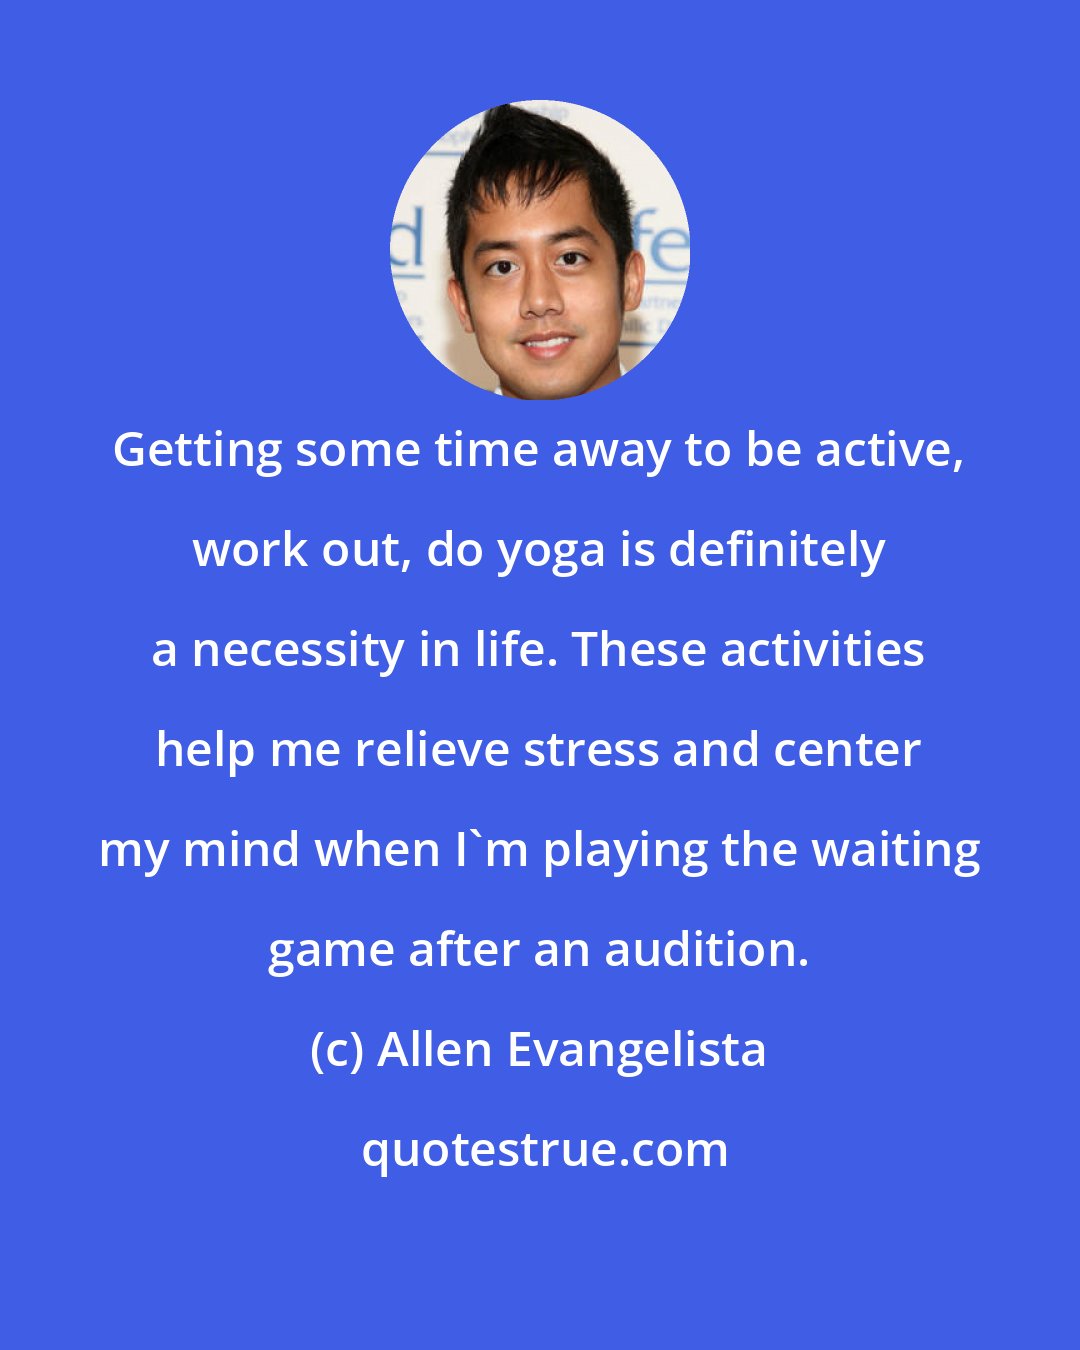 Allen Evangelista: Getting some time away to be active, work out, do yoga is definitely a necessity in life. These activities help me relieve stress and center my mind when I'm playing the waiting game after an audition.